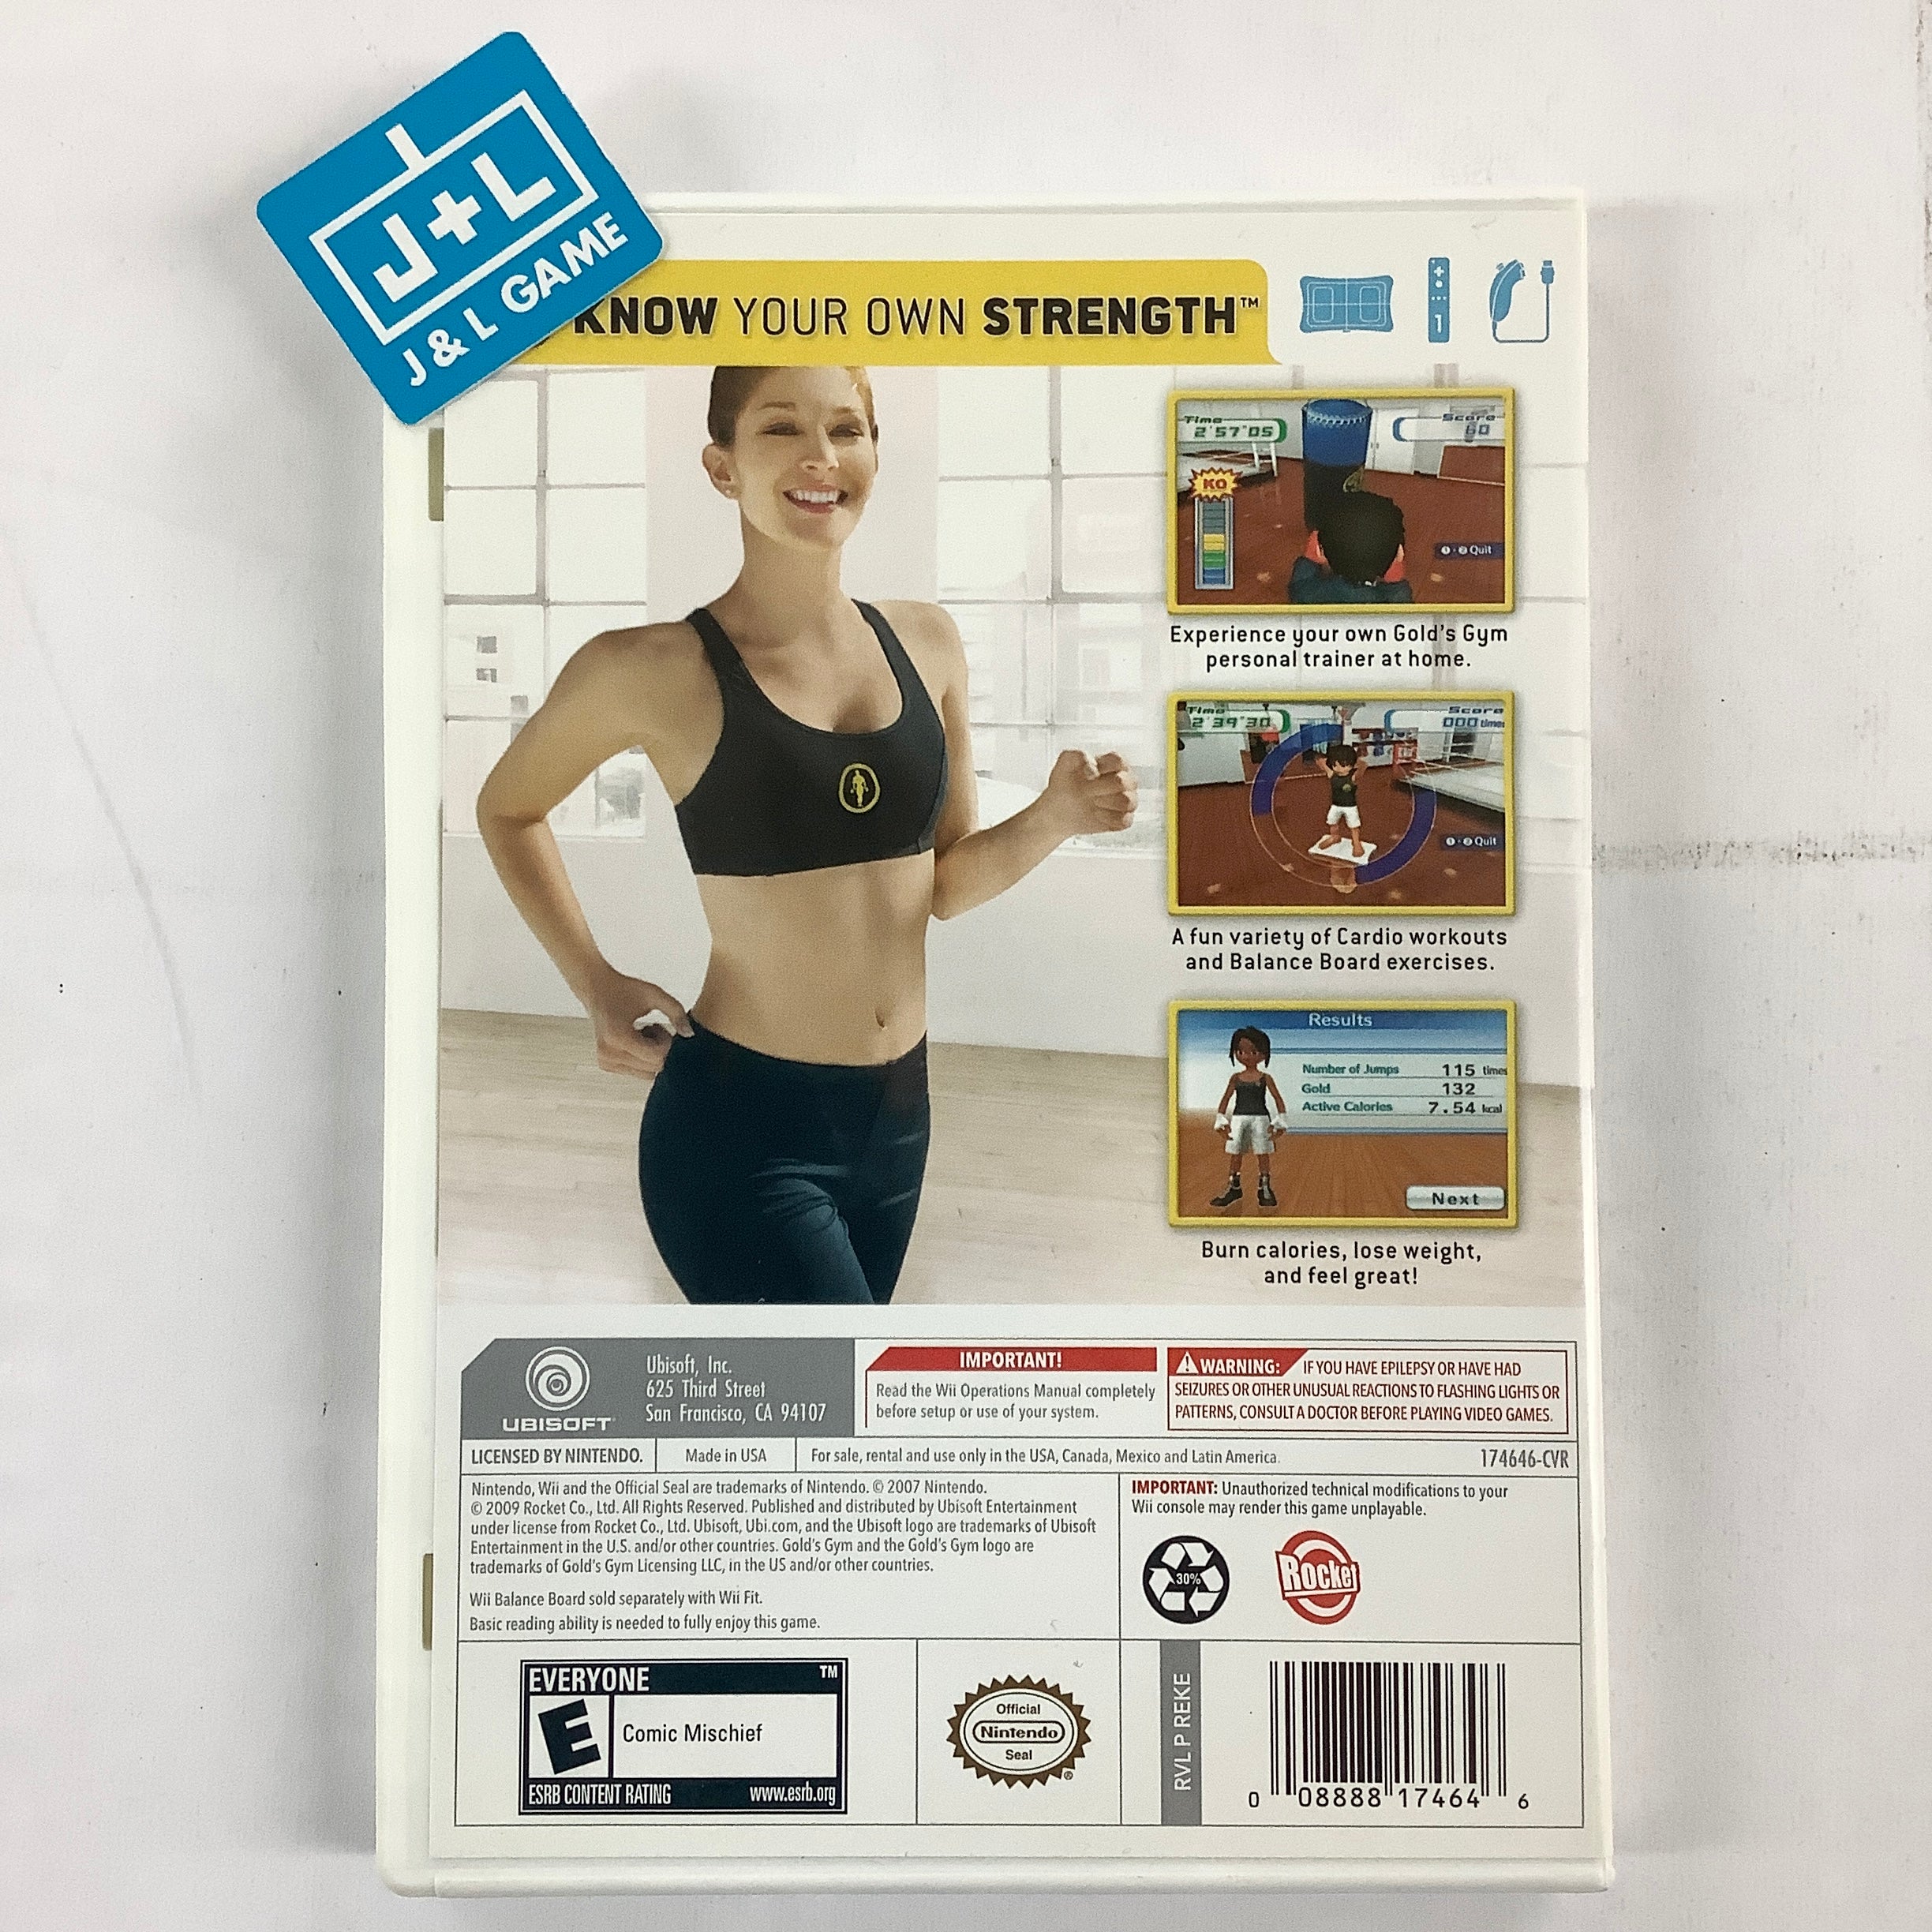 Gold's Gym: Cardio Workout - Nintendo Wii [Pre-Owned] Video Games Ubisoft   